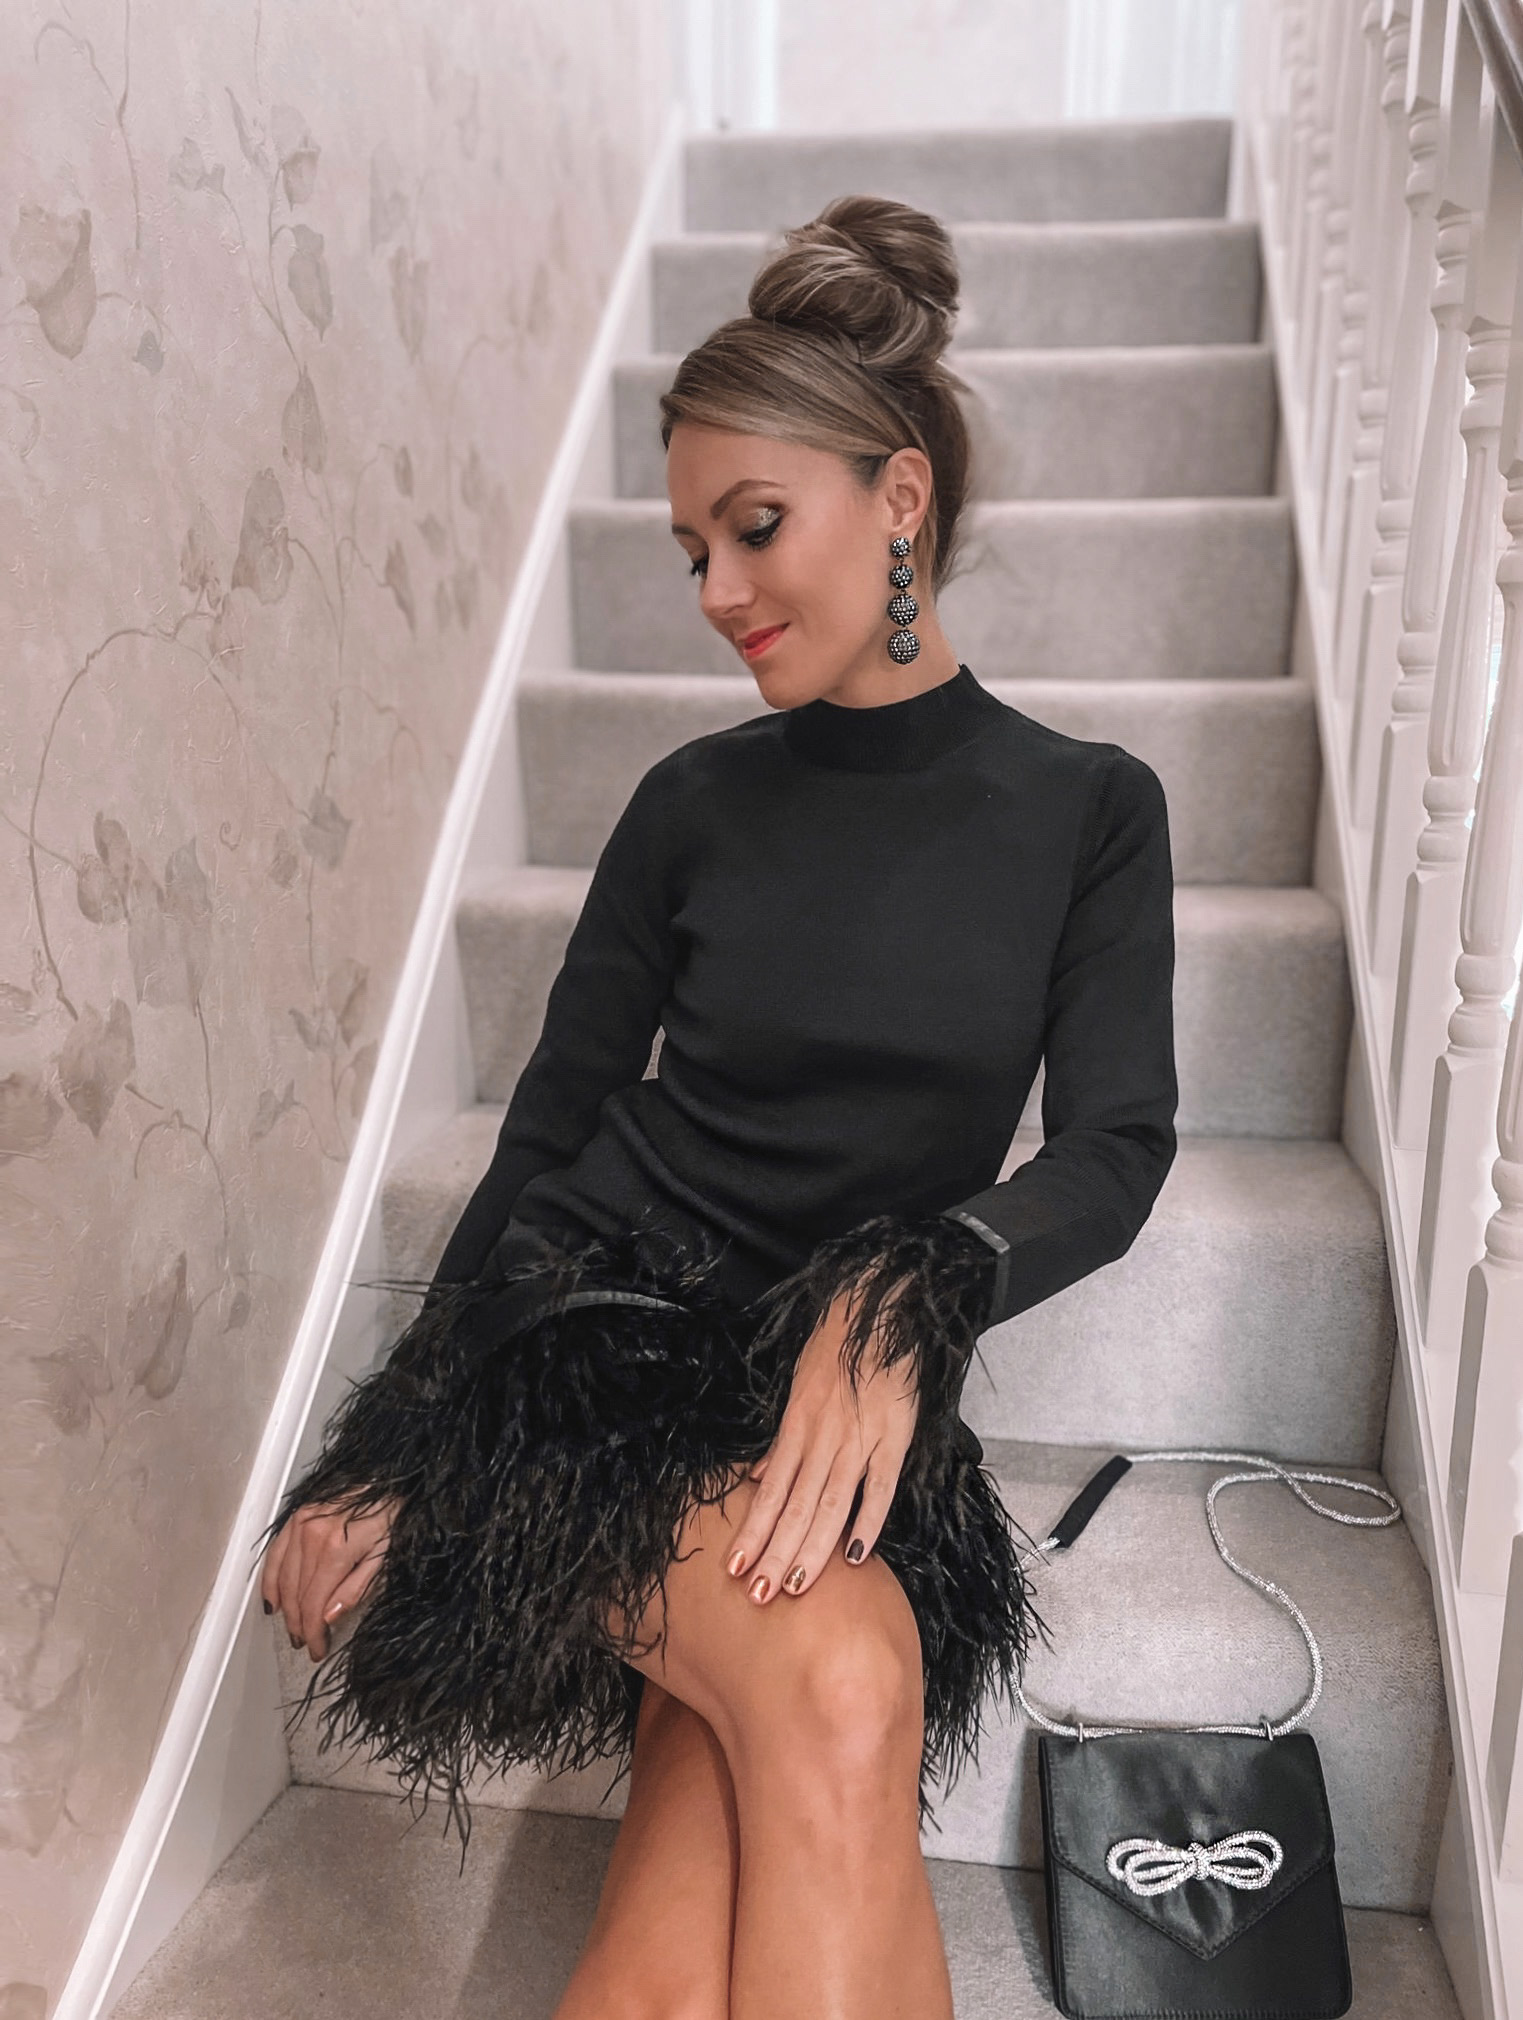 Feather Hem Knit Mini Dress | ASOS DESIGN envelope shoulder bag with diamante bow in black satin | Public Desire Wide Fit Midnight heeled shoes with bow detail in black